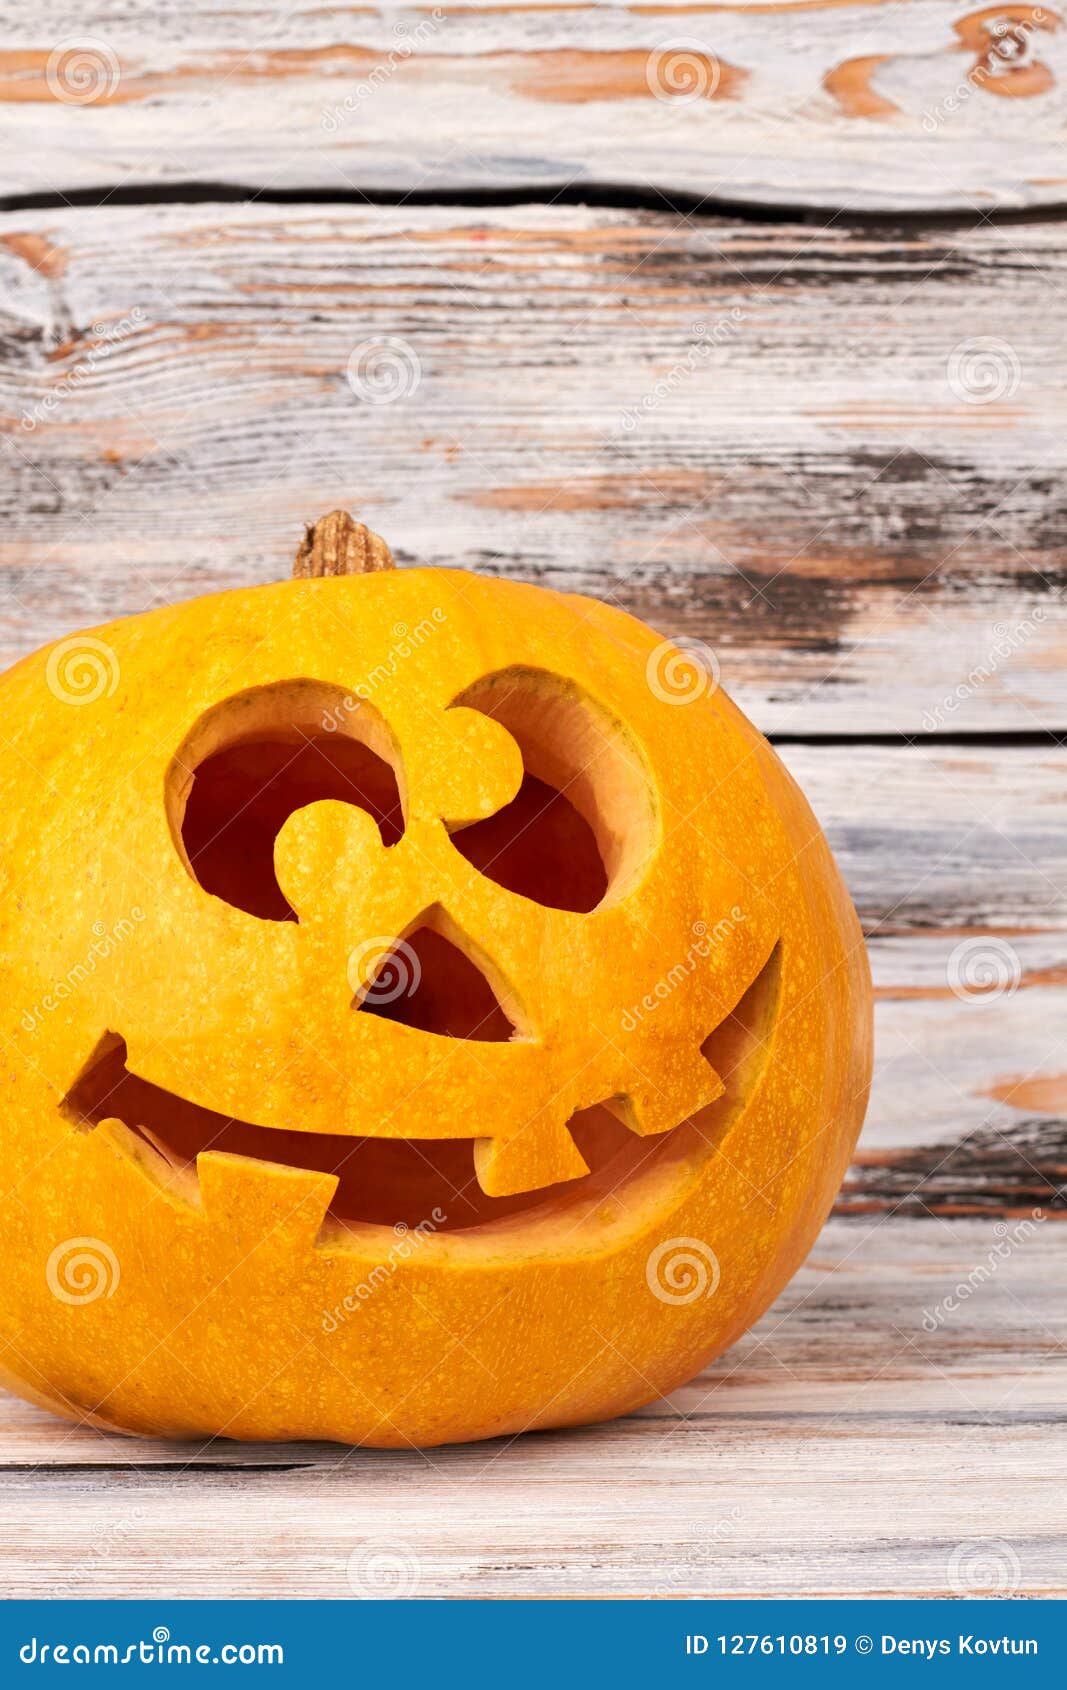 Funny Halloween Pumpkin on Wooden Background. Stock Image - Image of cute,  decoration: 127610819